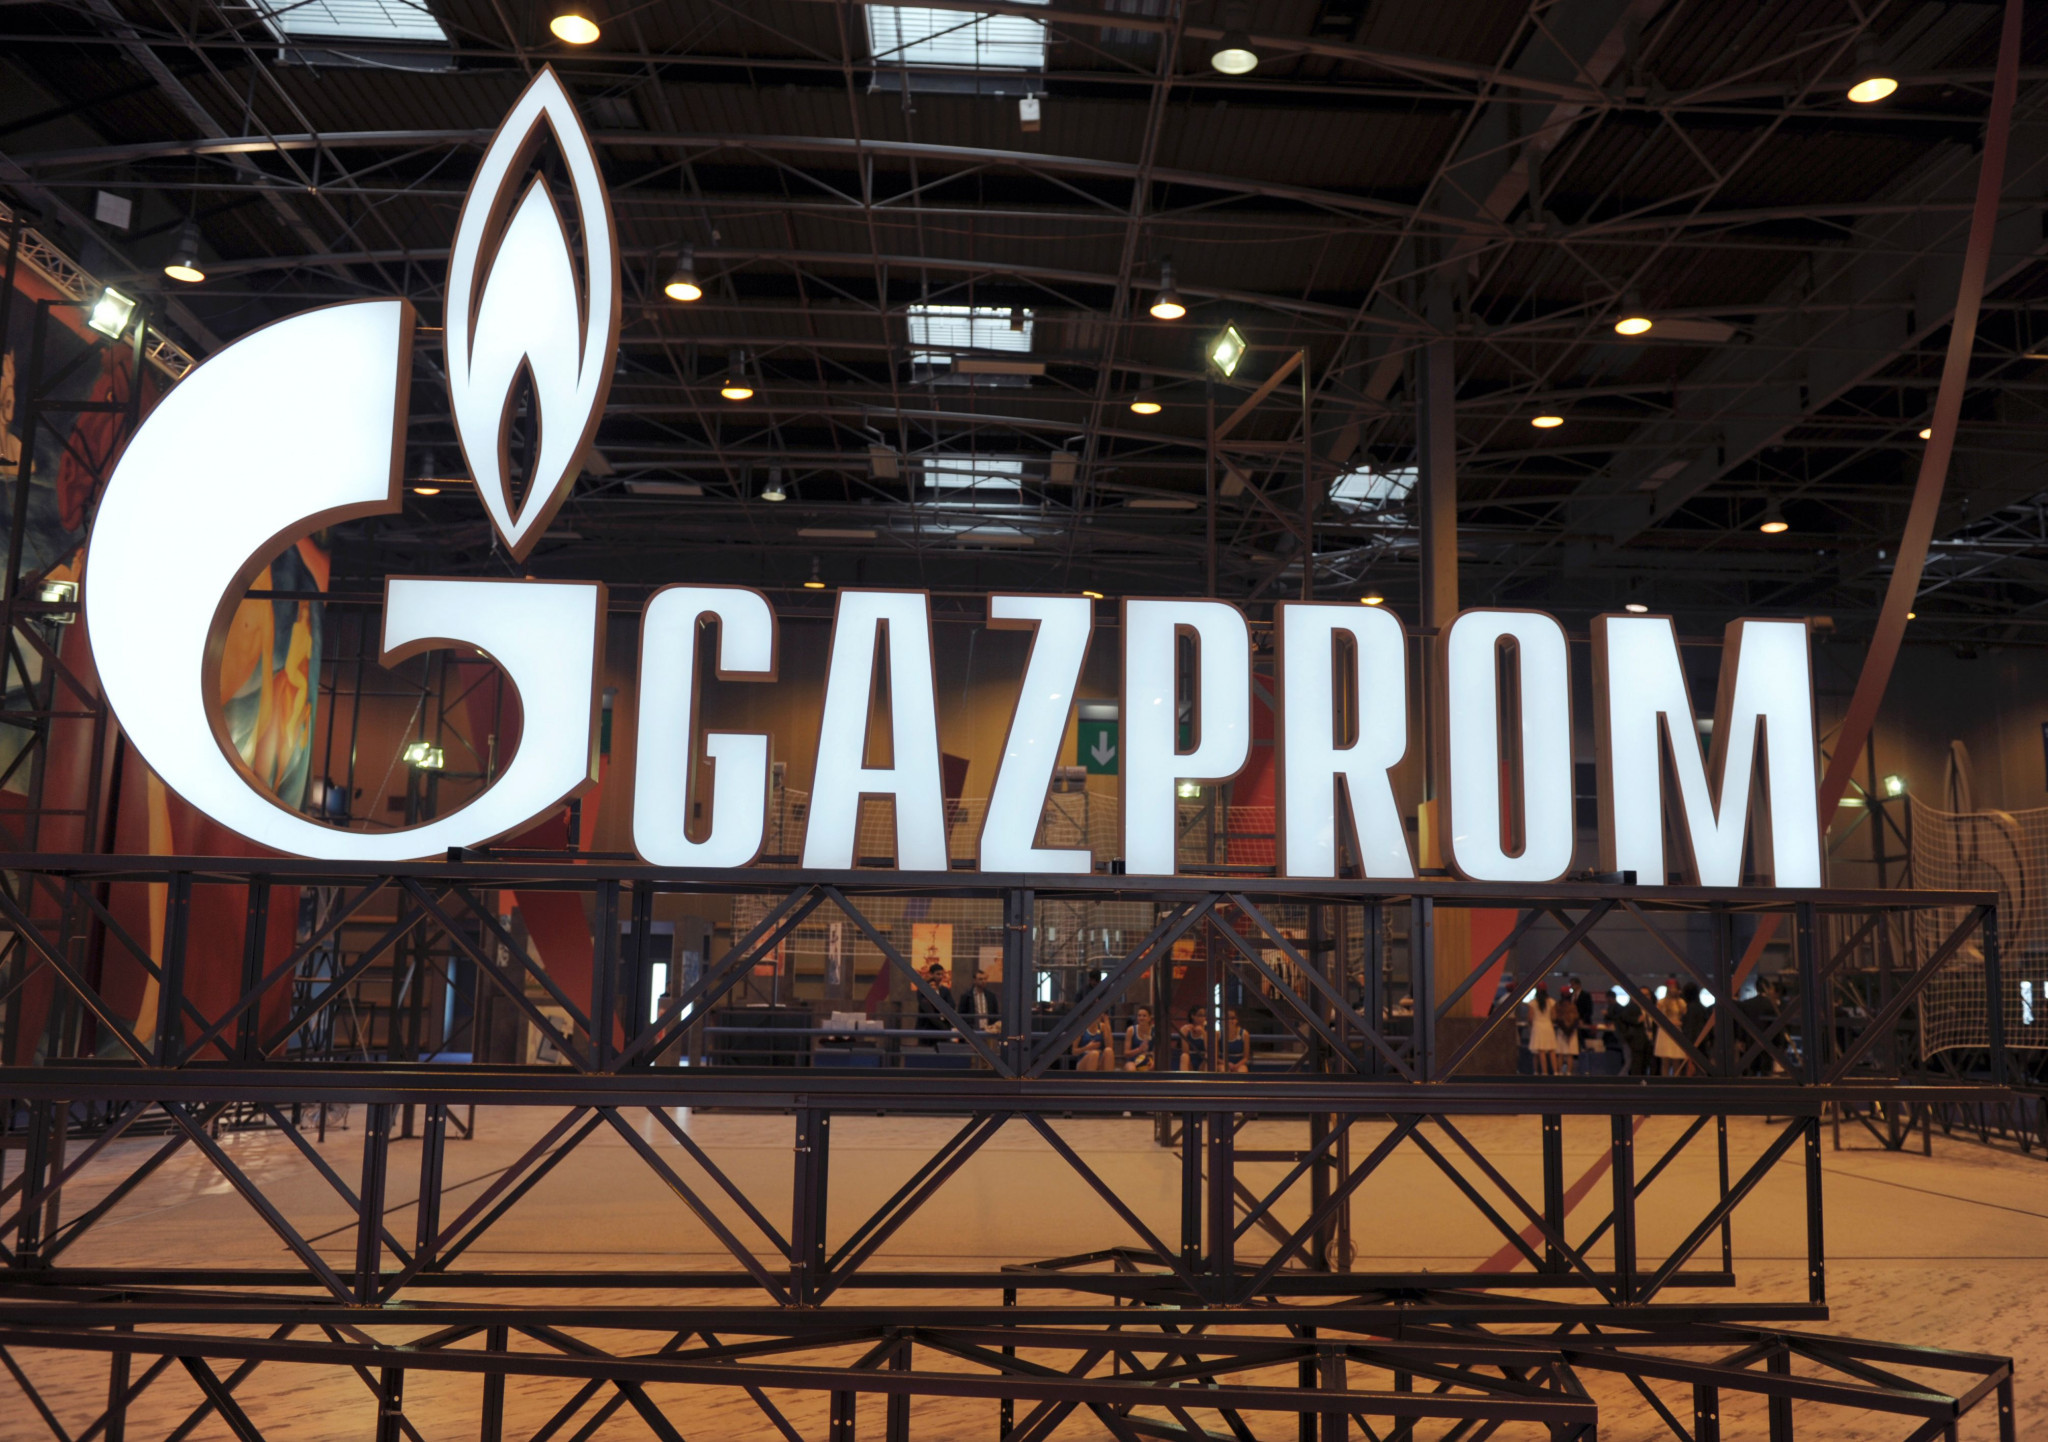 Gazprom's sponsorship deal with the IBA is set to end at the end of 2022 ©Getty Images